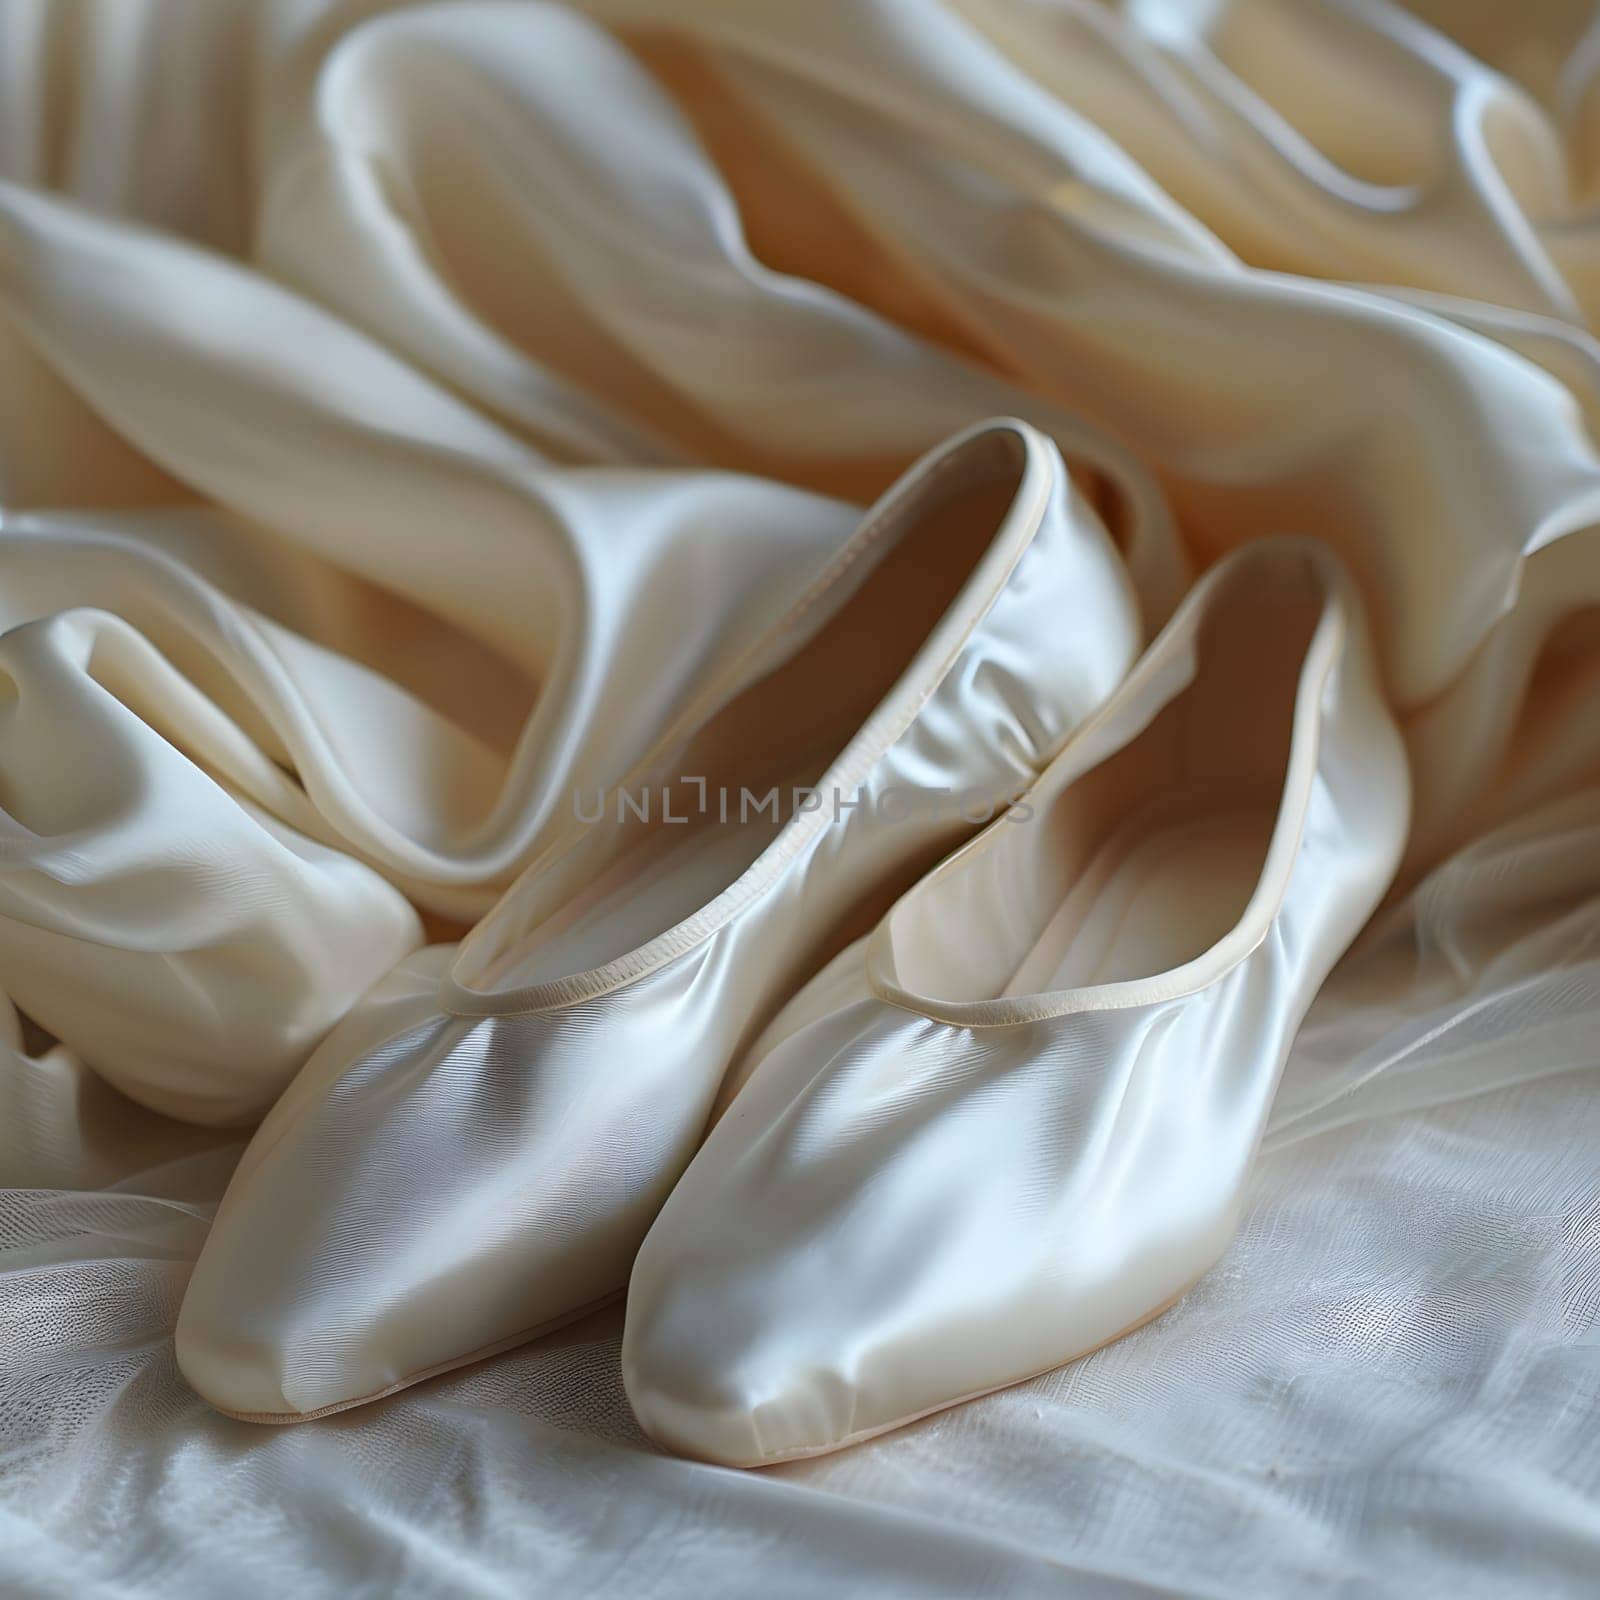 A pair of white ballet shoes elegantly placed on top of a bed, surrounded by delicate linens and floral petals, creating a whimsical and romantic scene